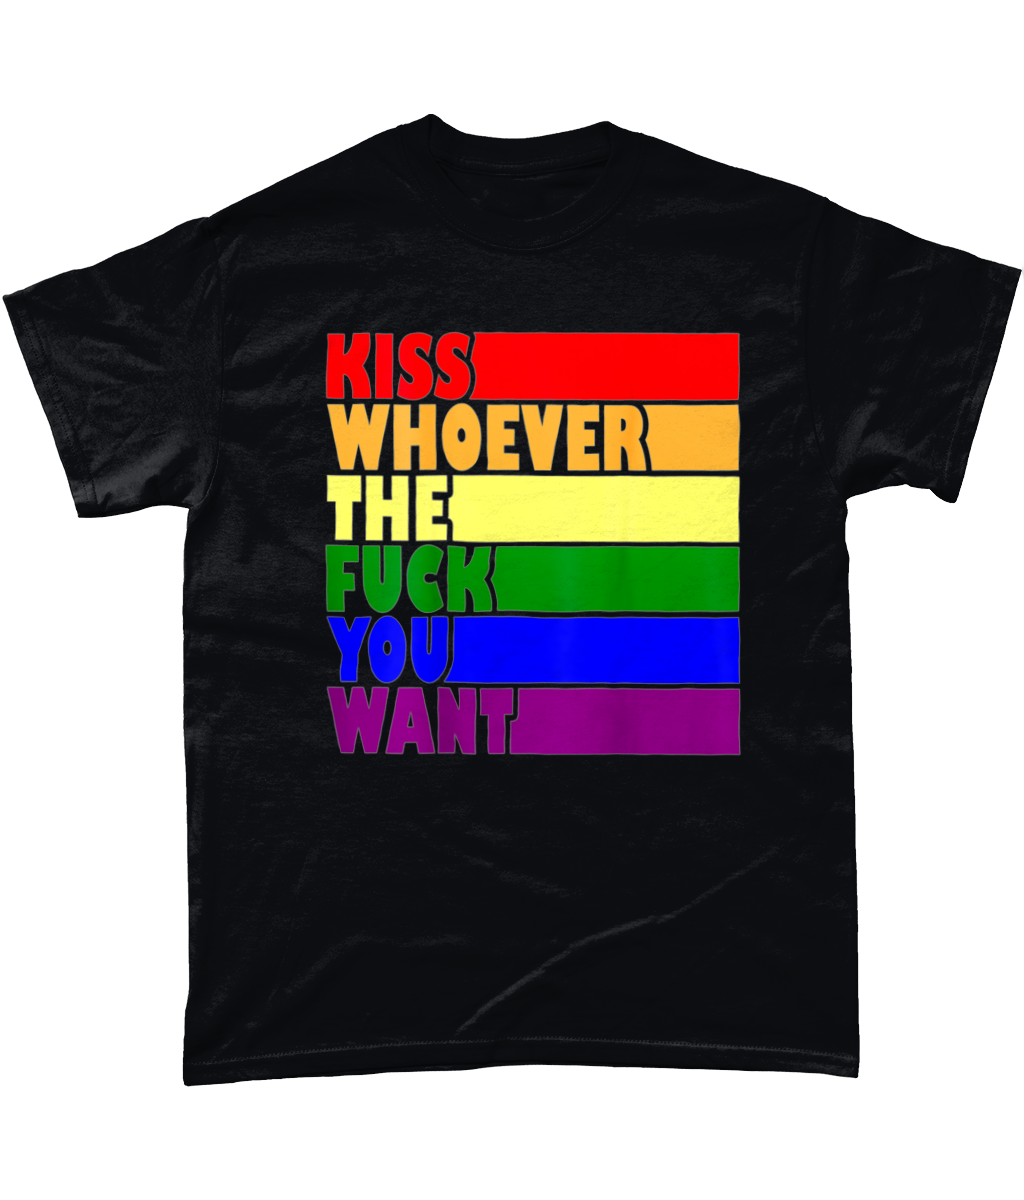 Kiss whoever the fuck you want t-shirt gay pride LGBTQIA